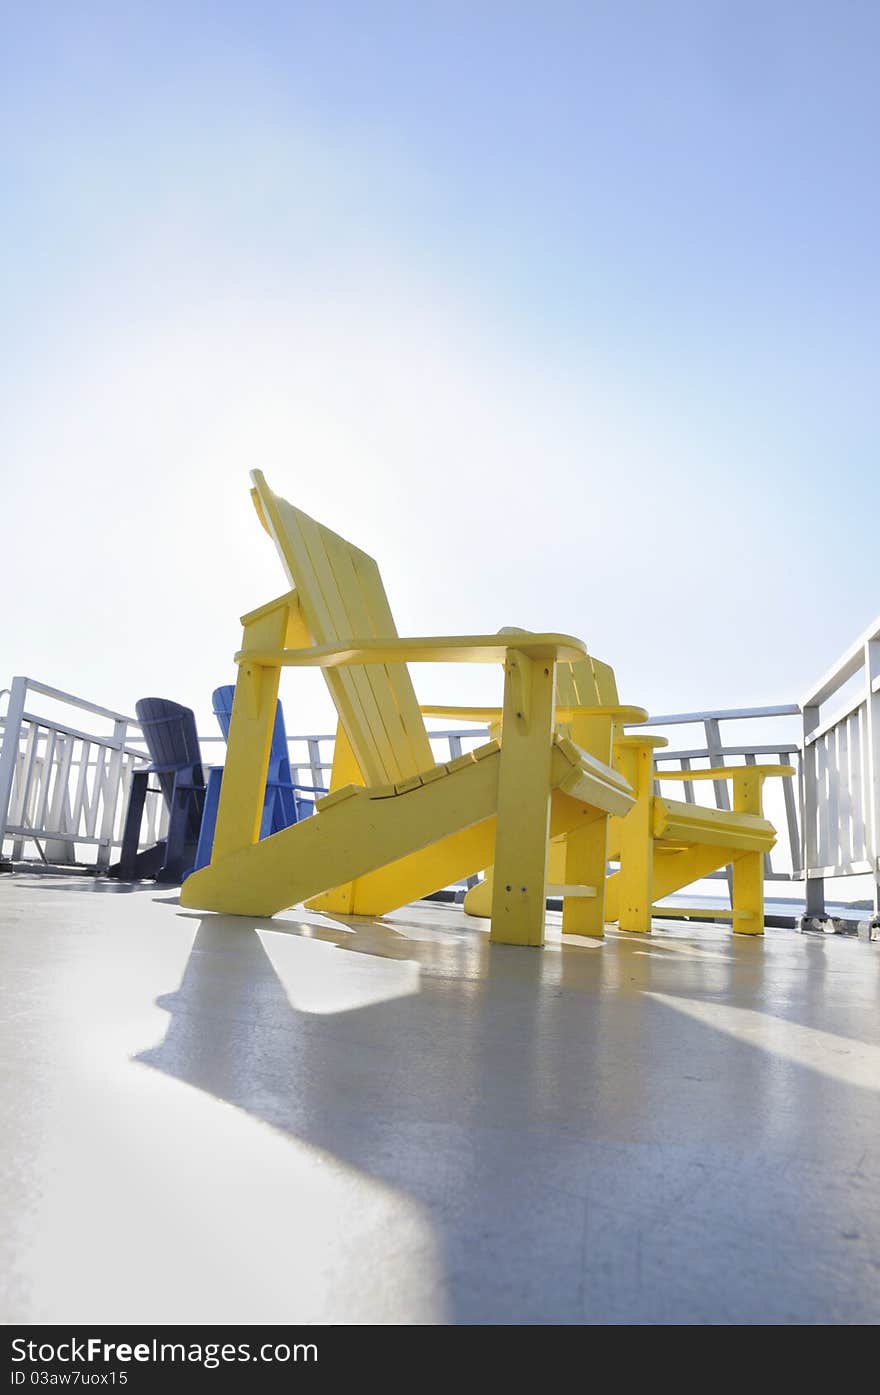 A yellow chair on a cruise deck. A yellow chair on a cruise deck.